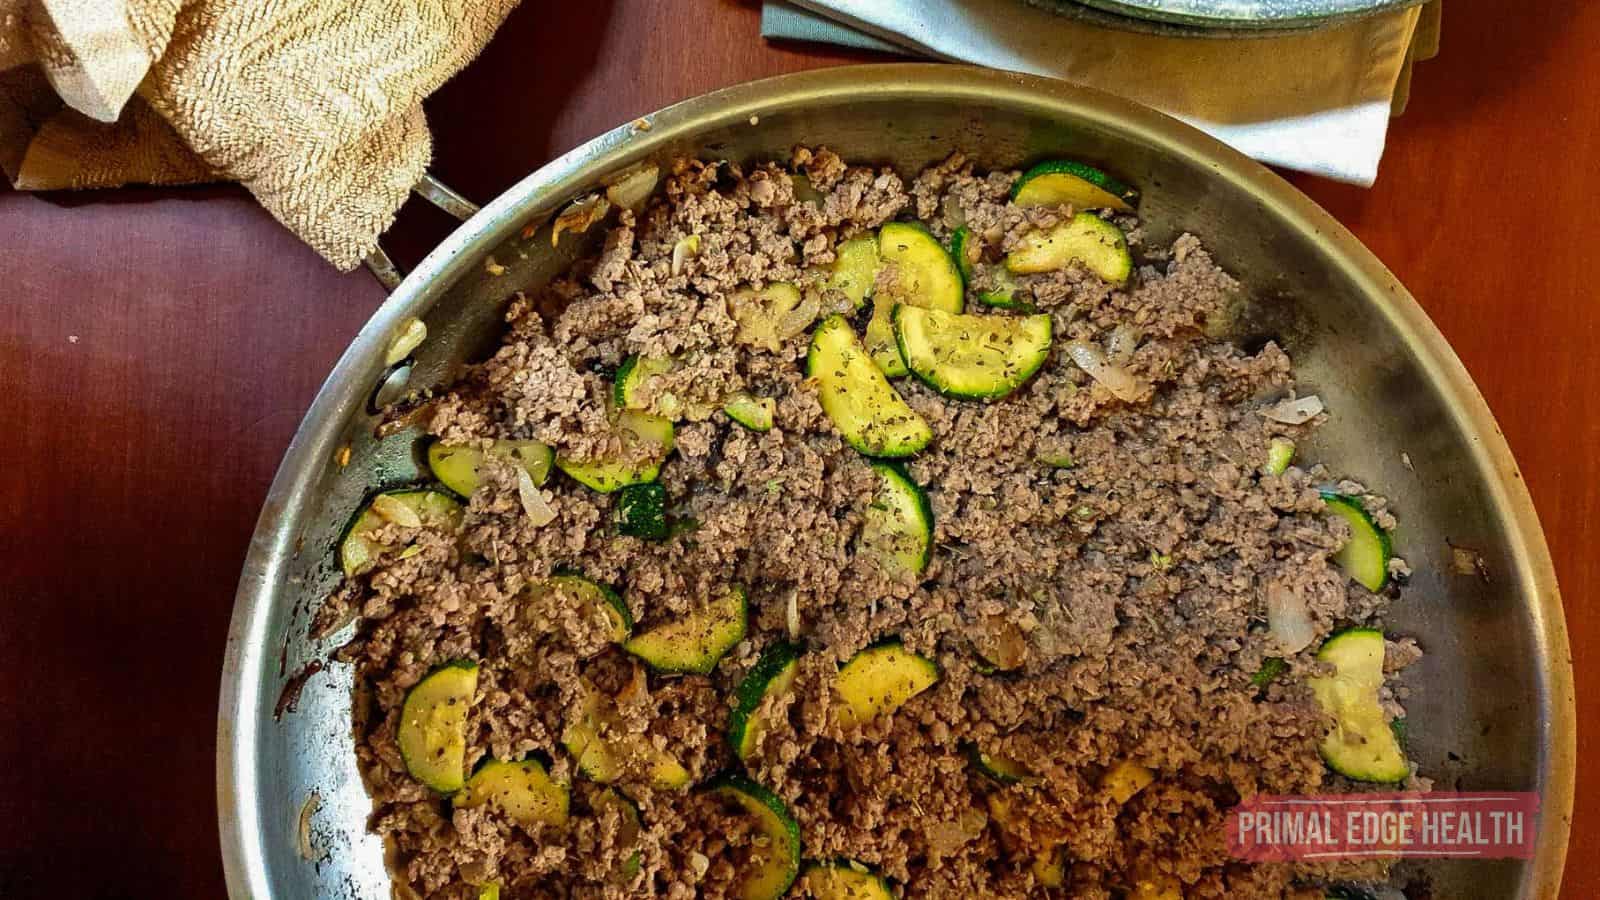 A picutre of ground beef, onion, and zucchini in stainless skillet.